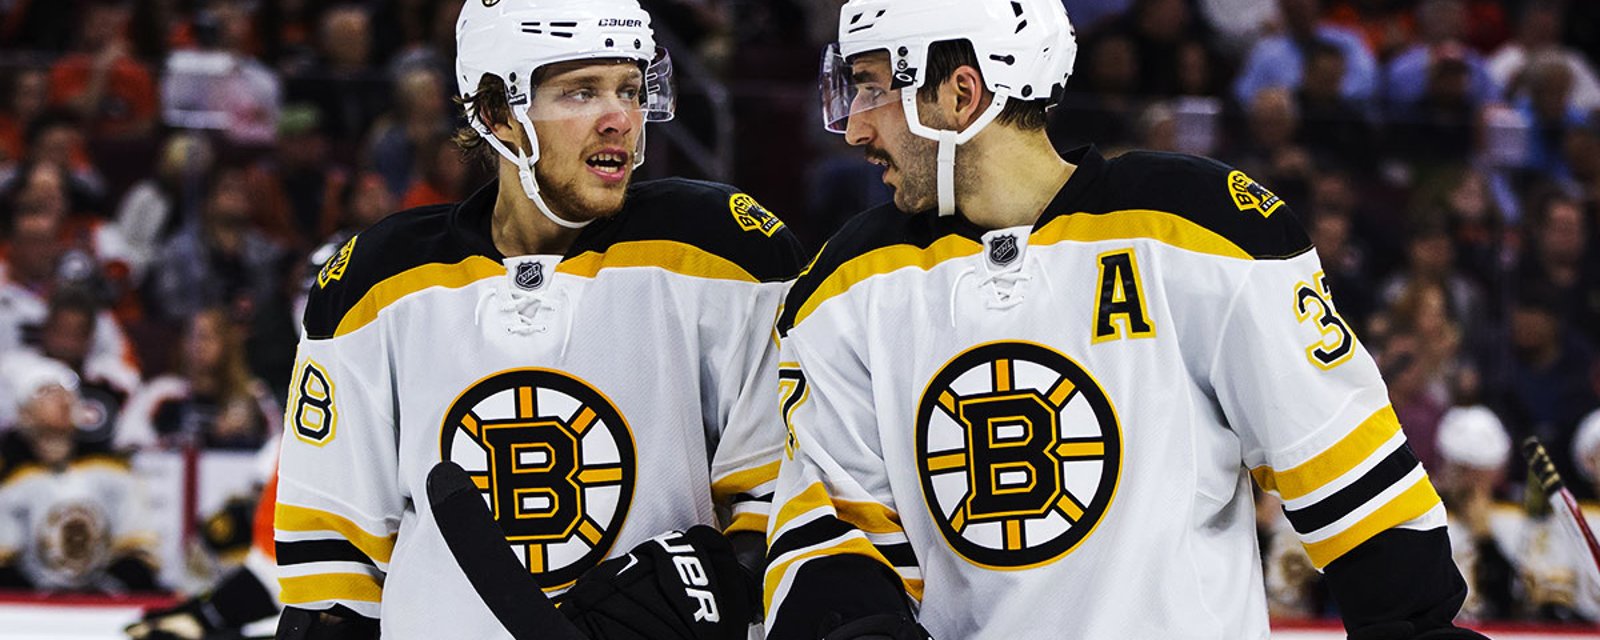 Breaking: One of the Bruins' first-liner is out!